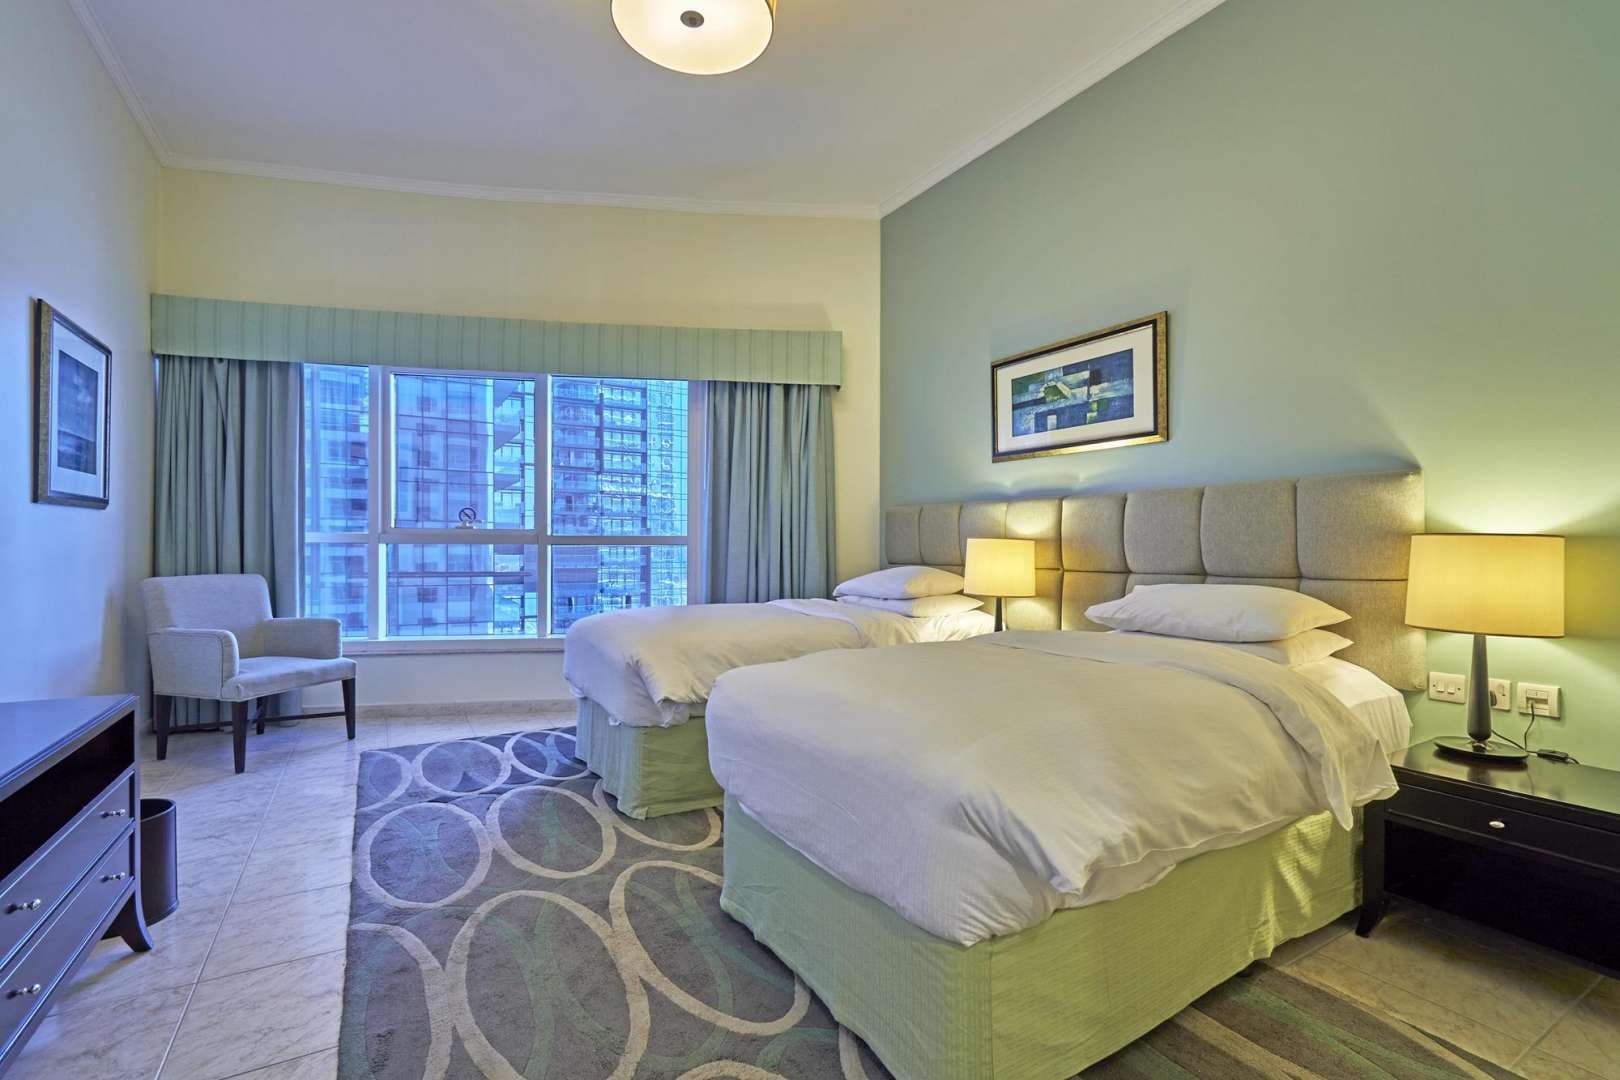 2 Bedroom Serviced Residences For Short Term Marriott Harbour Hotel And Suites Lp05699 1b6a410fe4232200.jpg